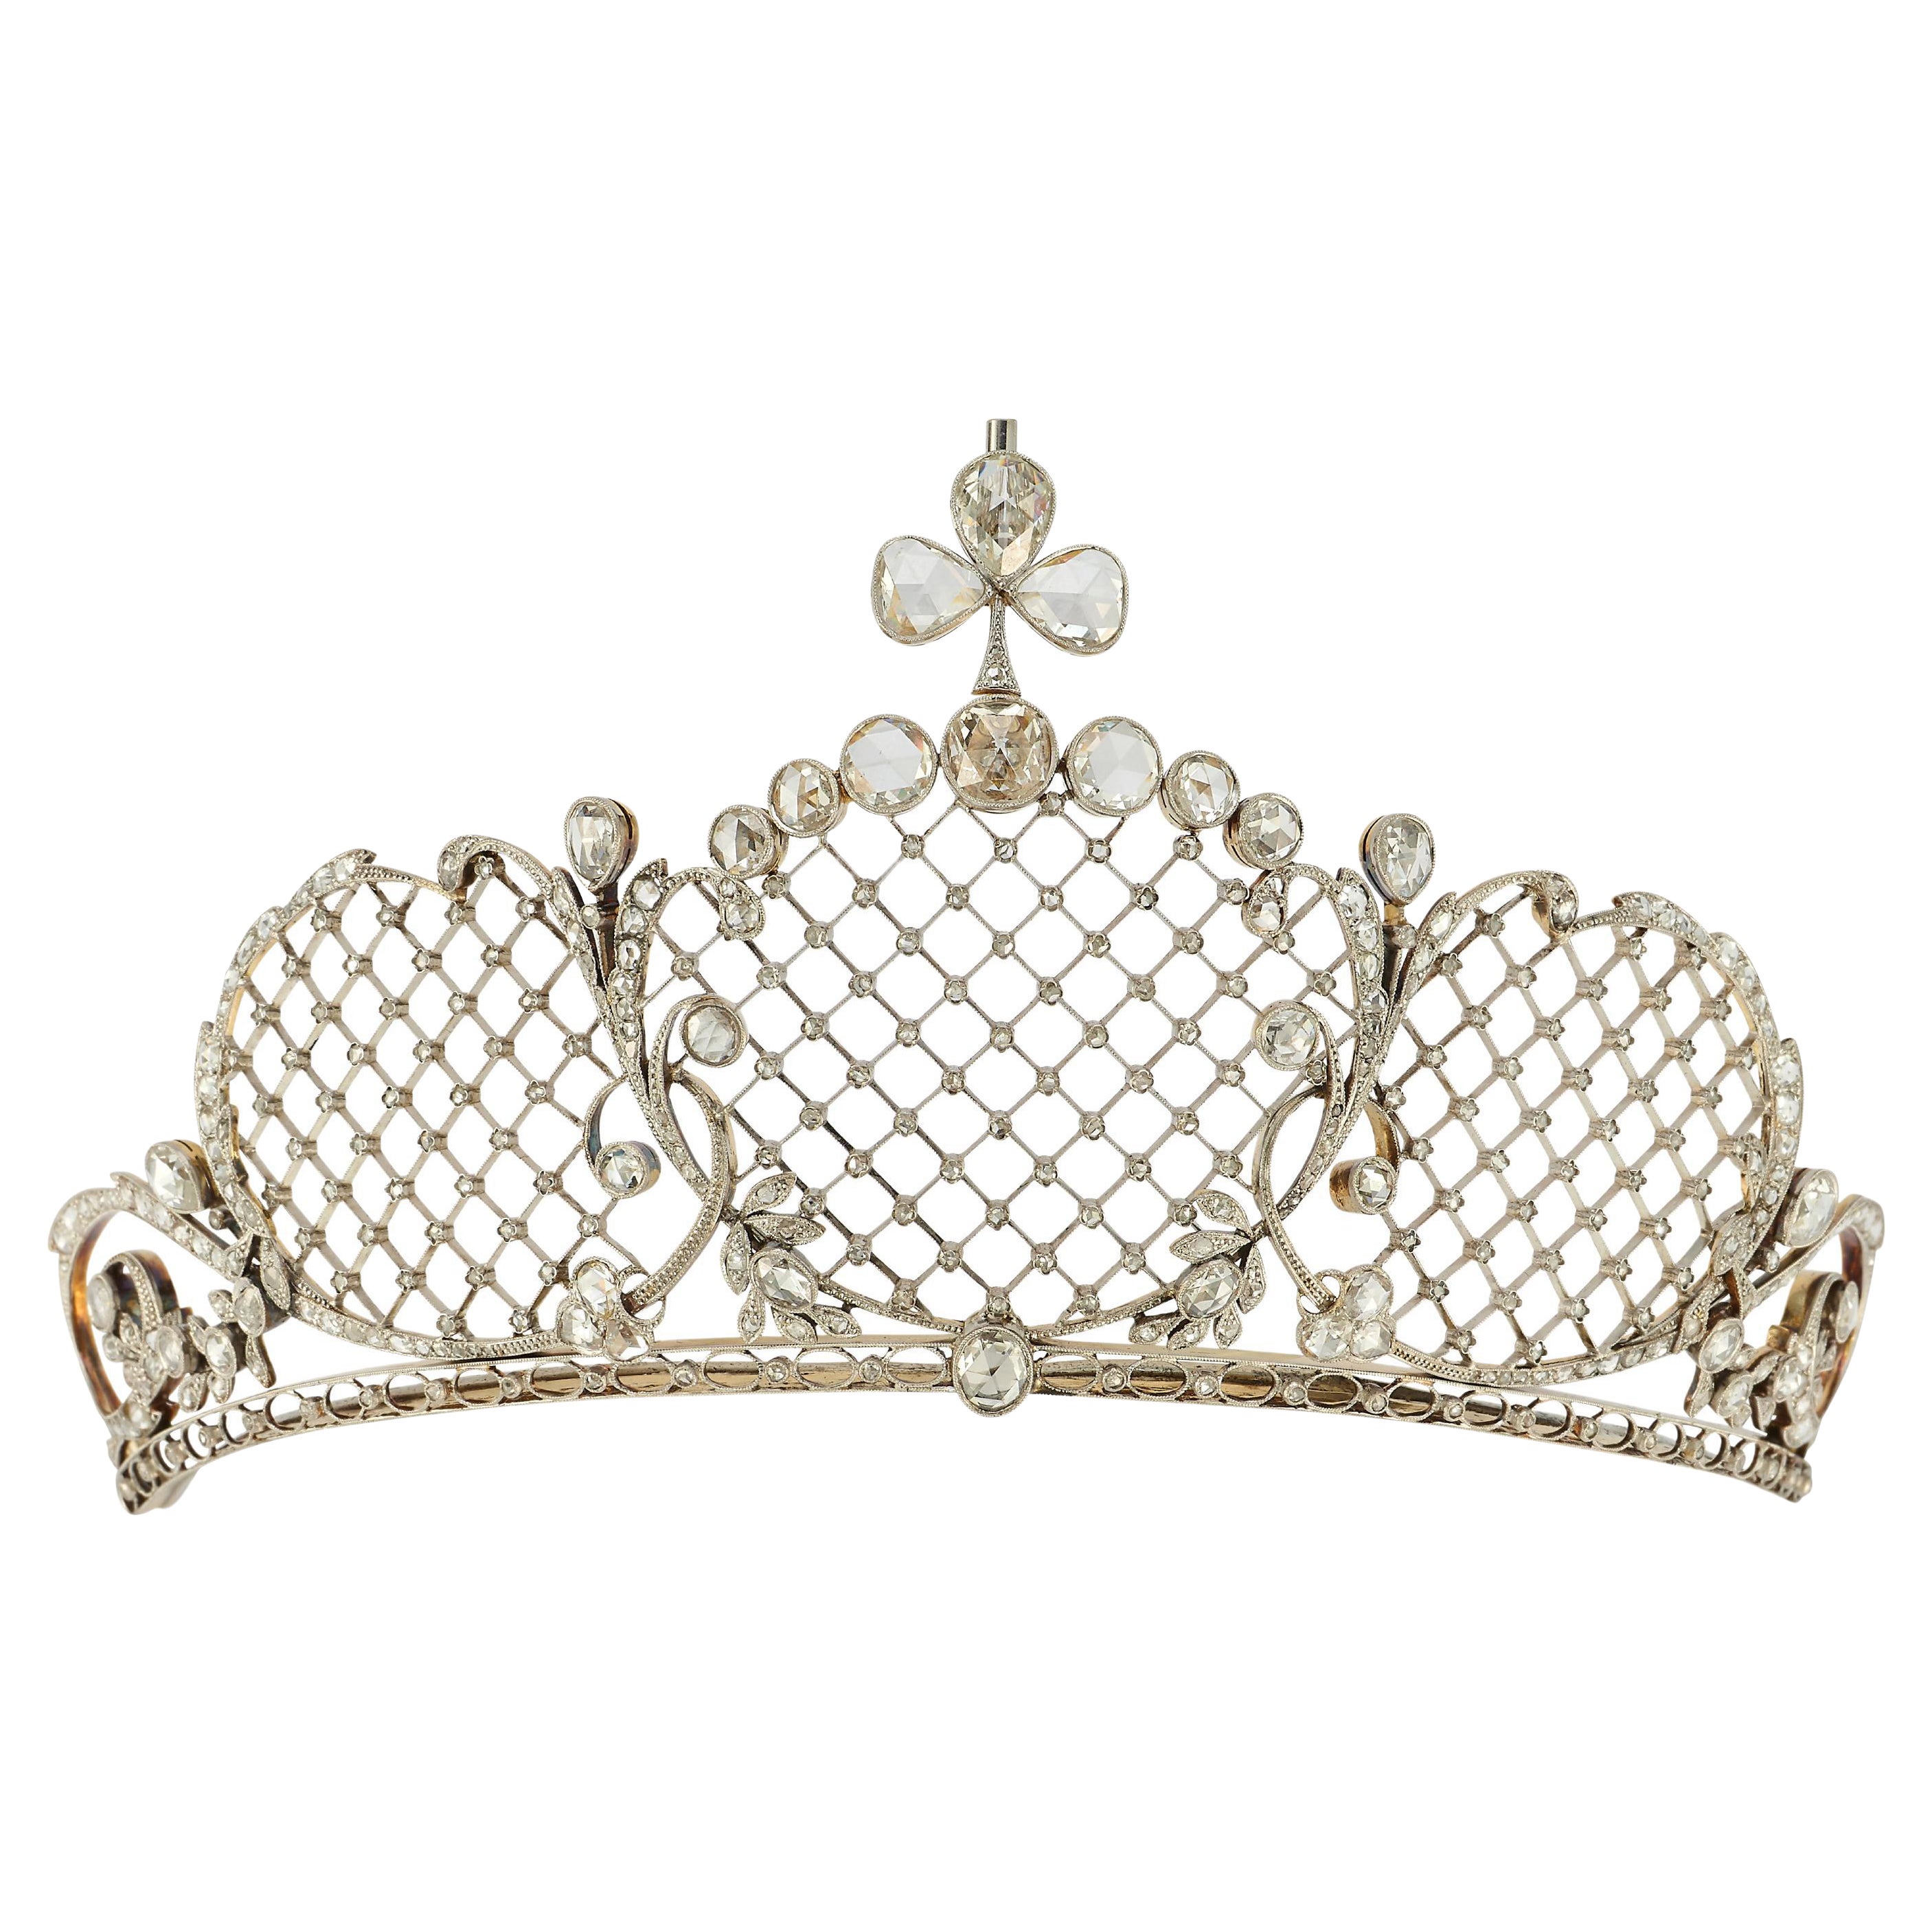 What's the difference between a diadem and a tiara?